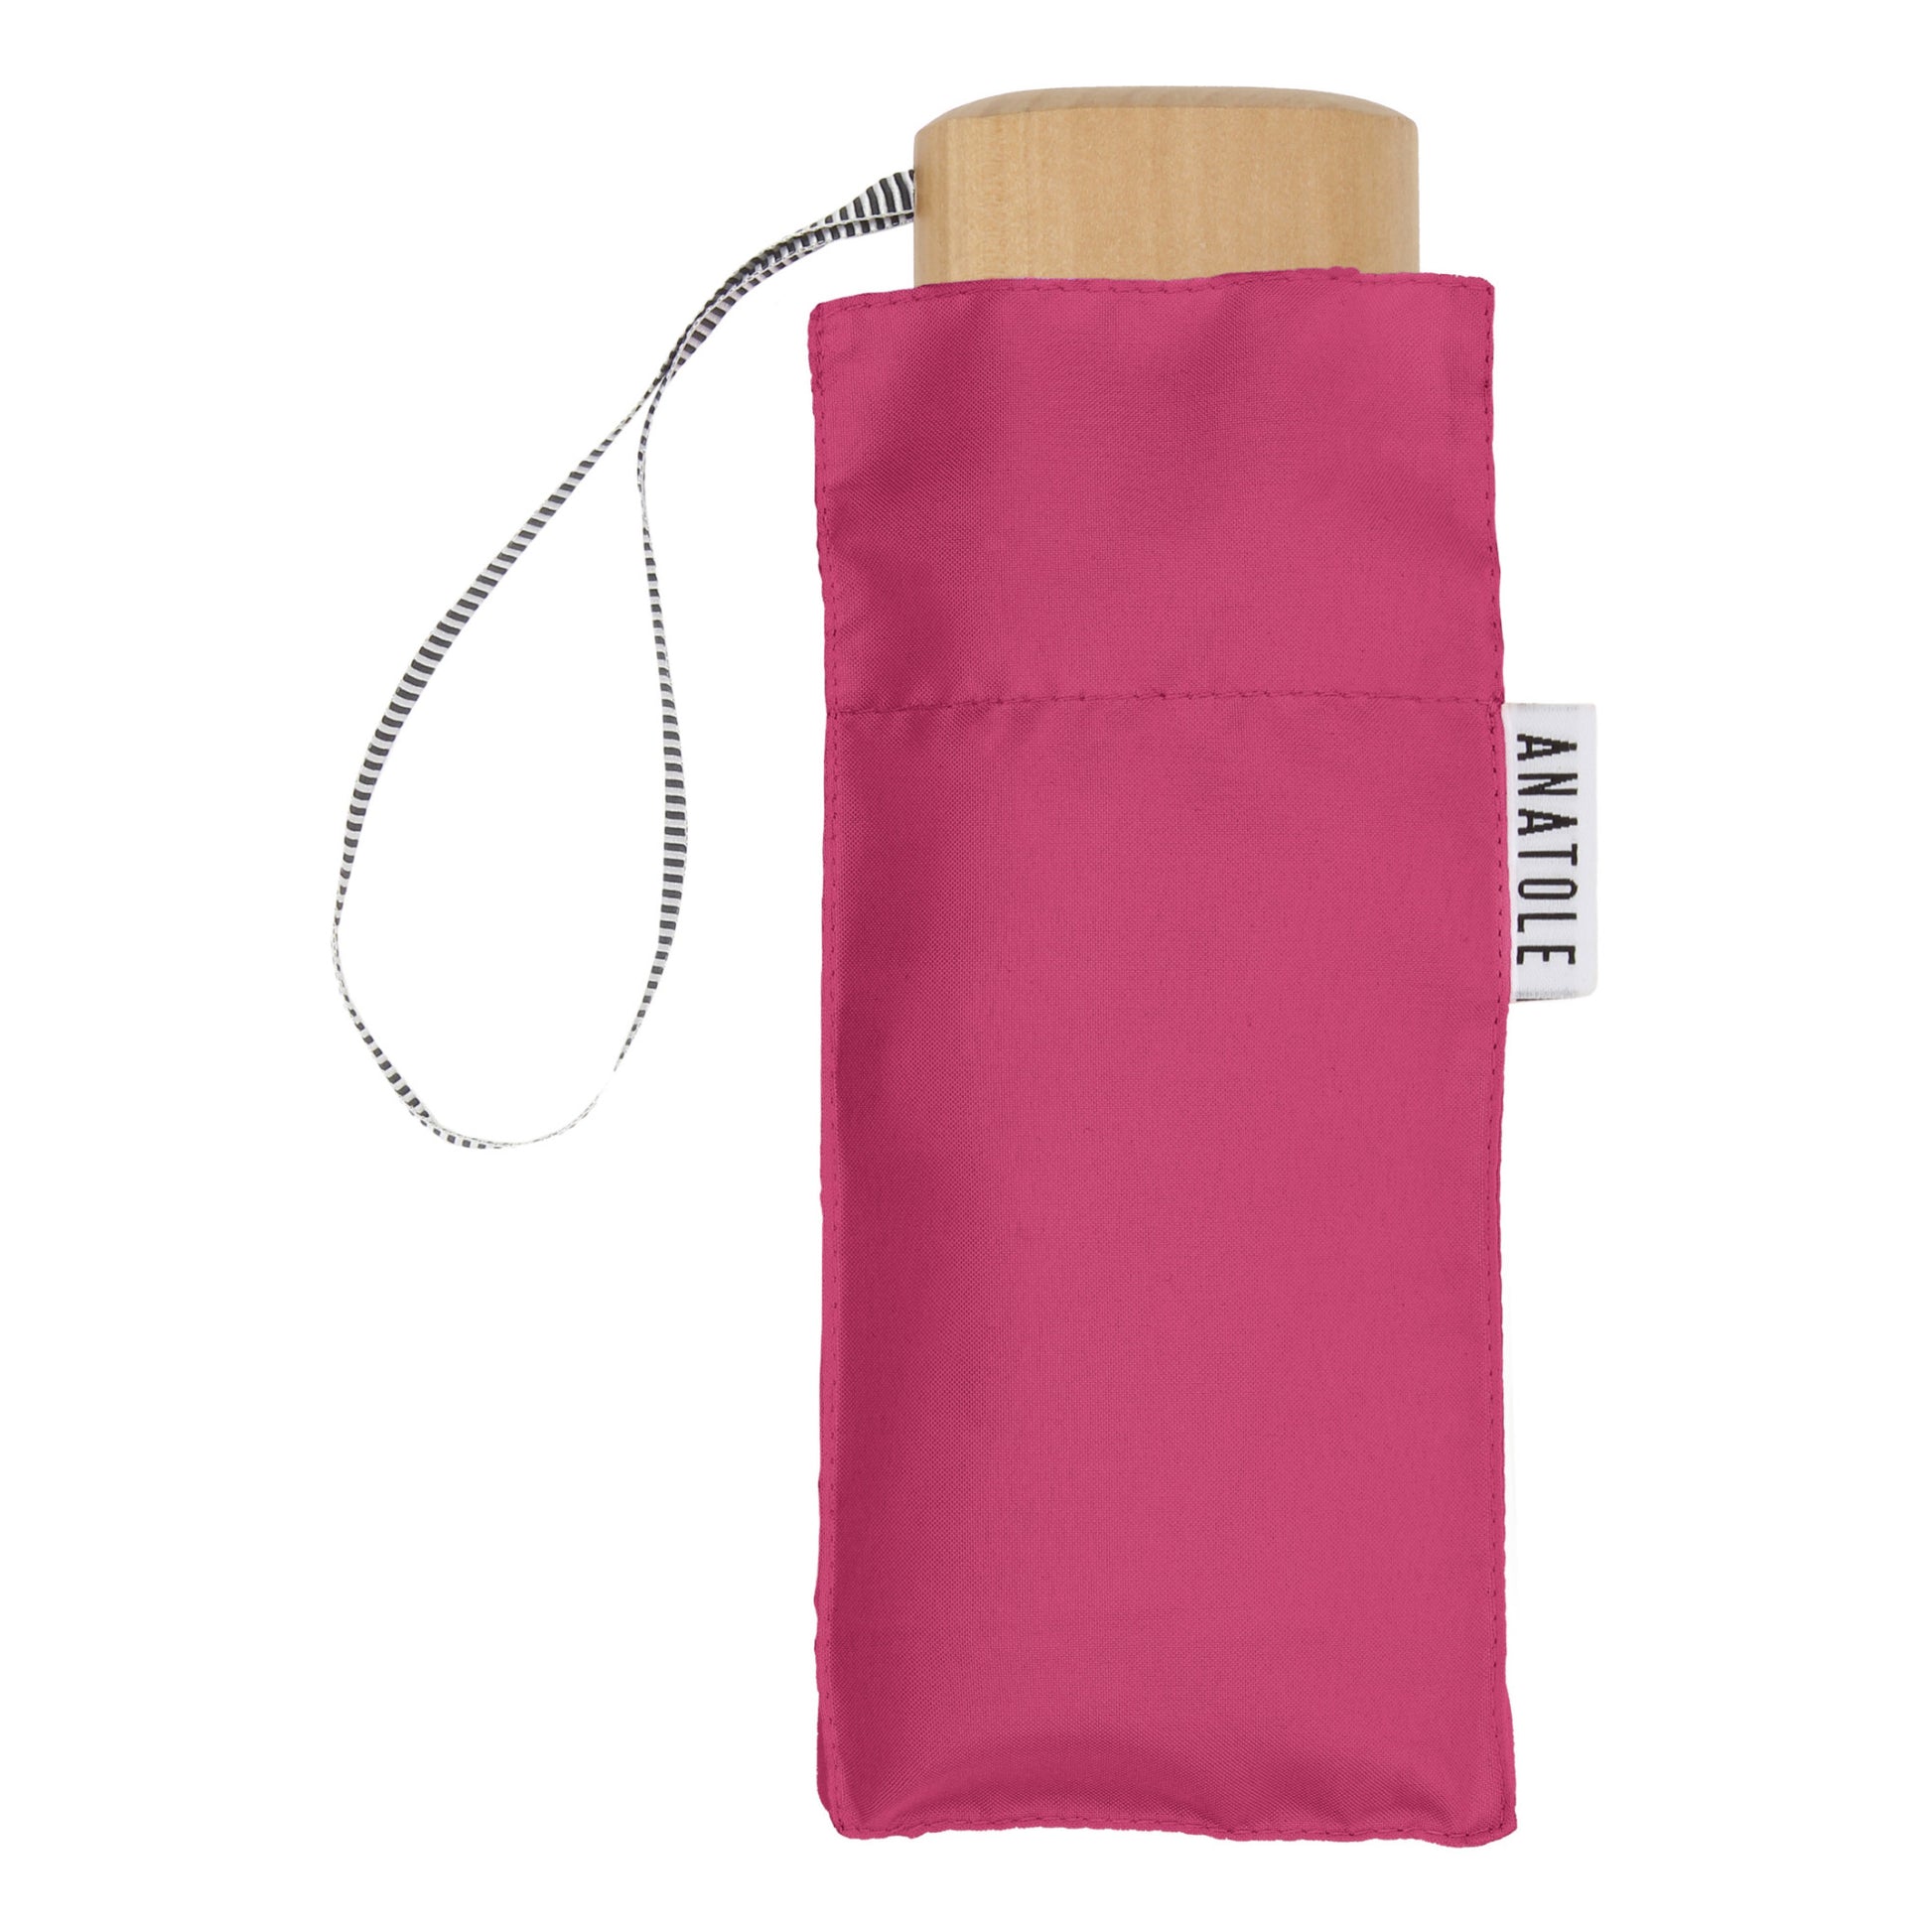 Anatole Suzanne Collapsible Micro Umbrella with wooden handle - dark pink 